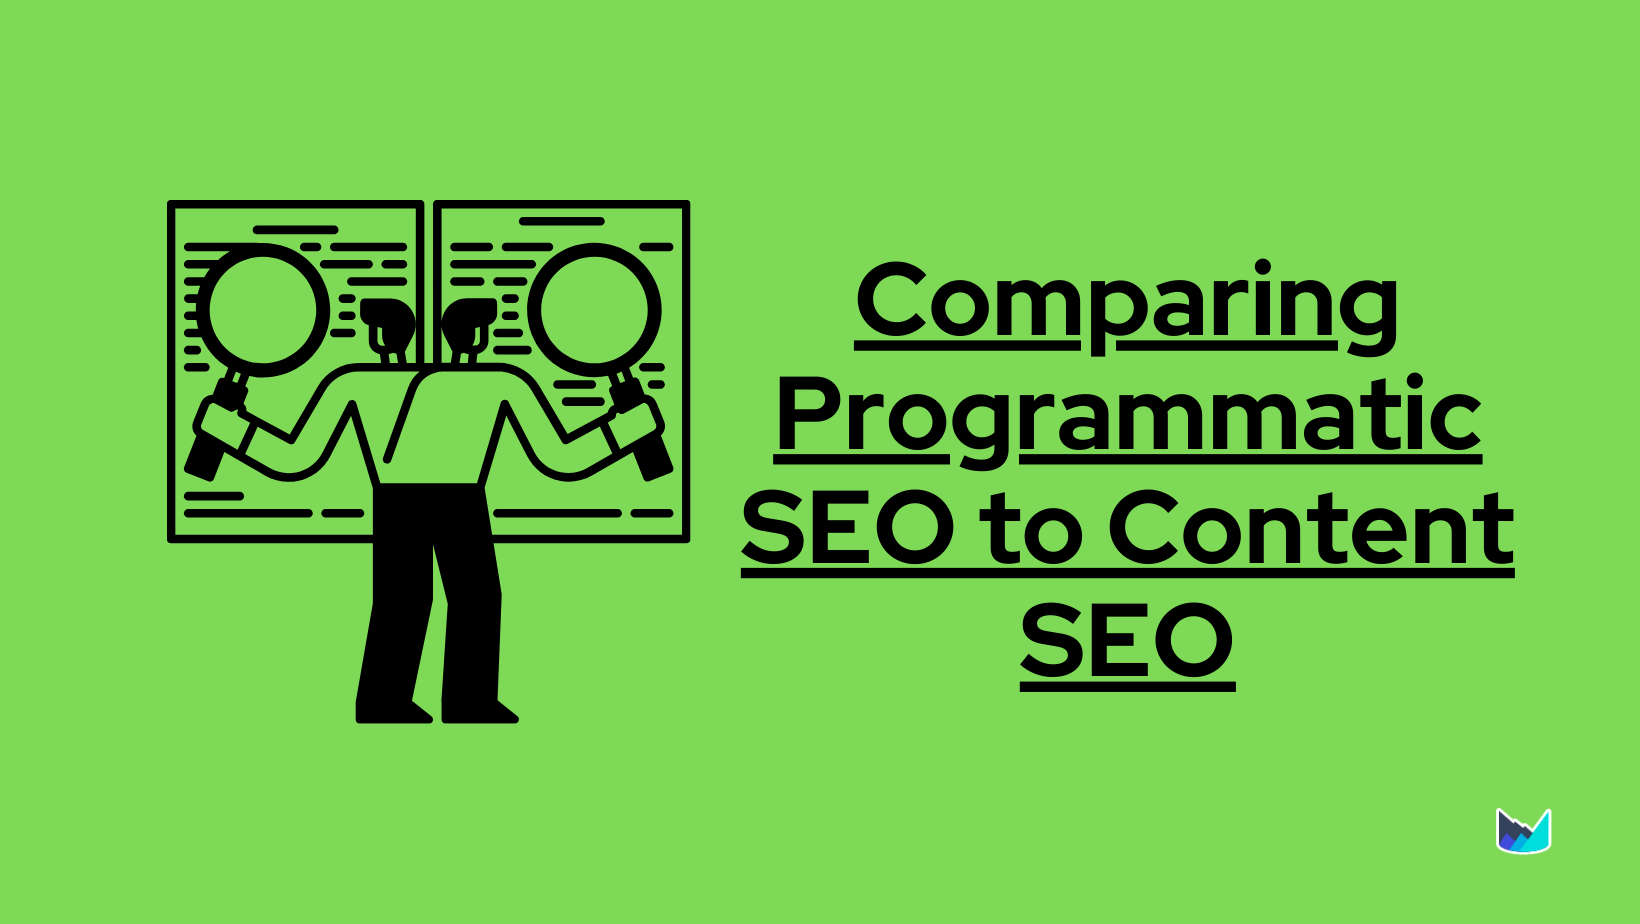 What Is Programmatic SEO? Examples and Ways to Find Programmatic SEO Niche